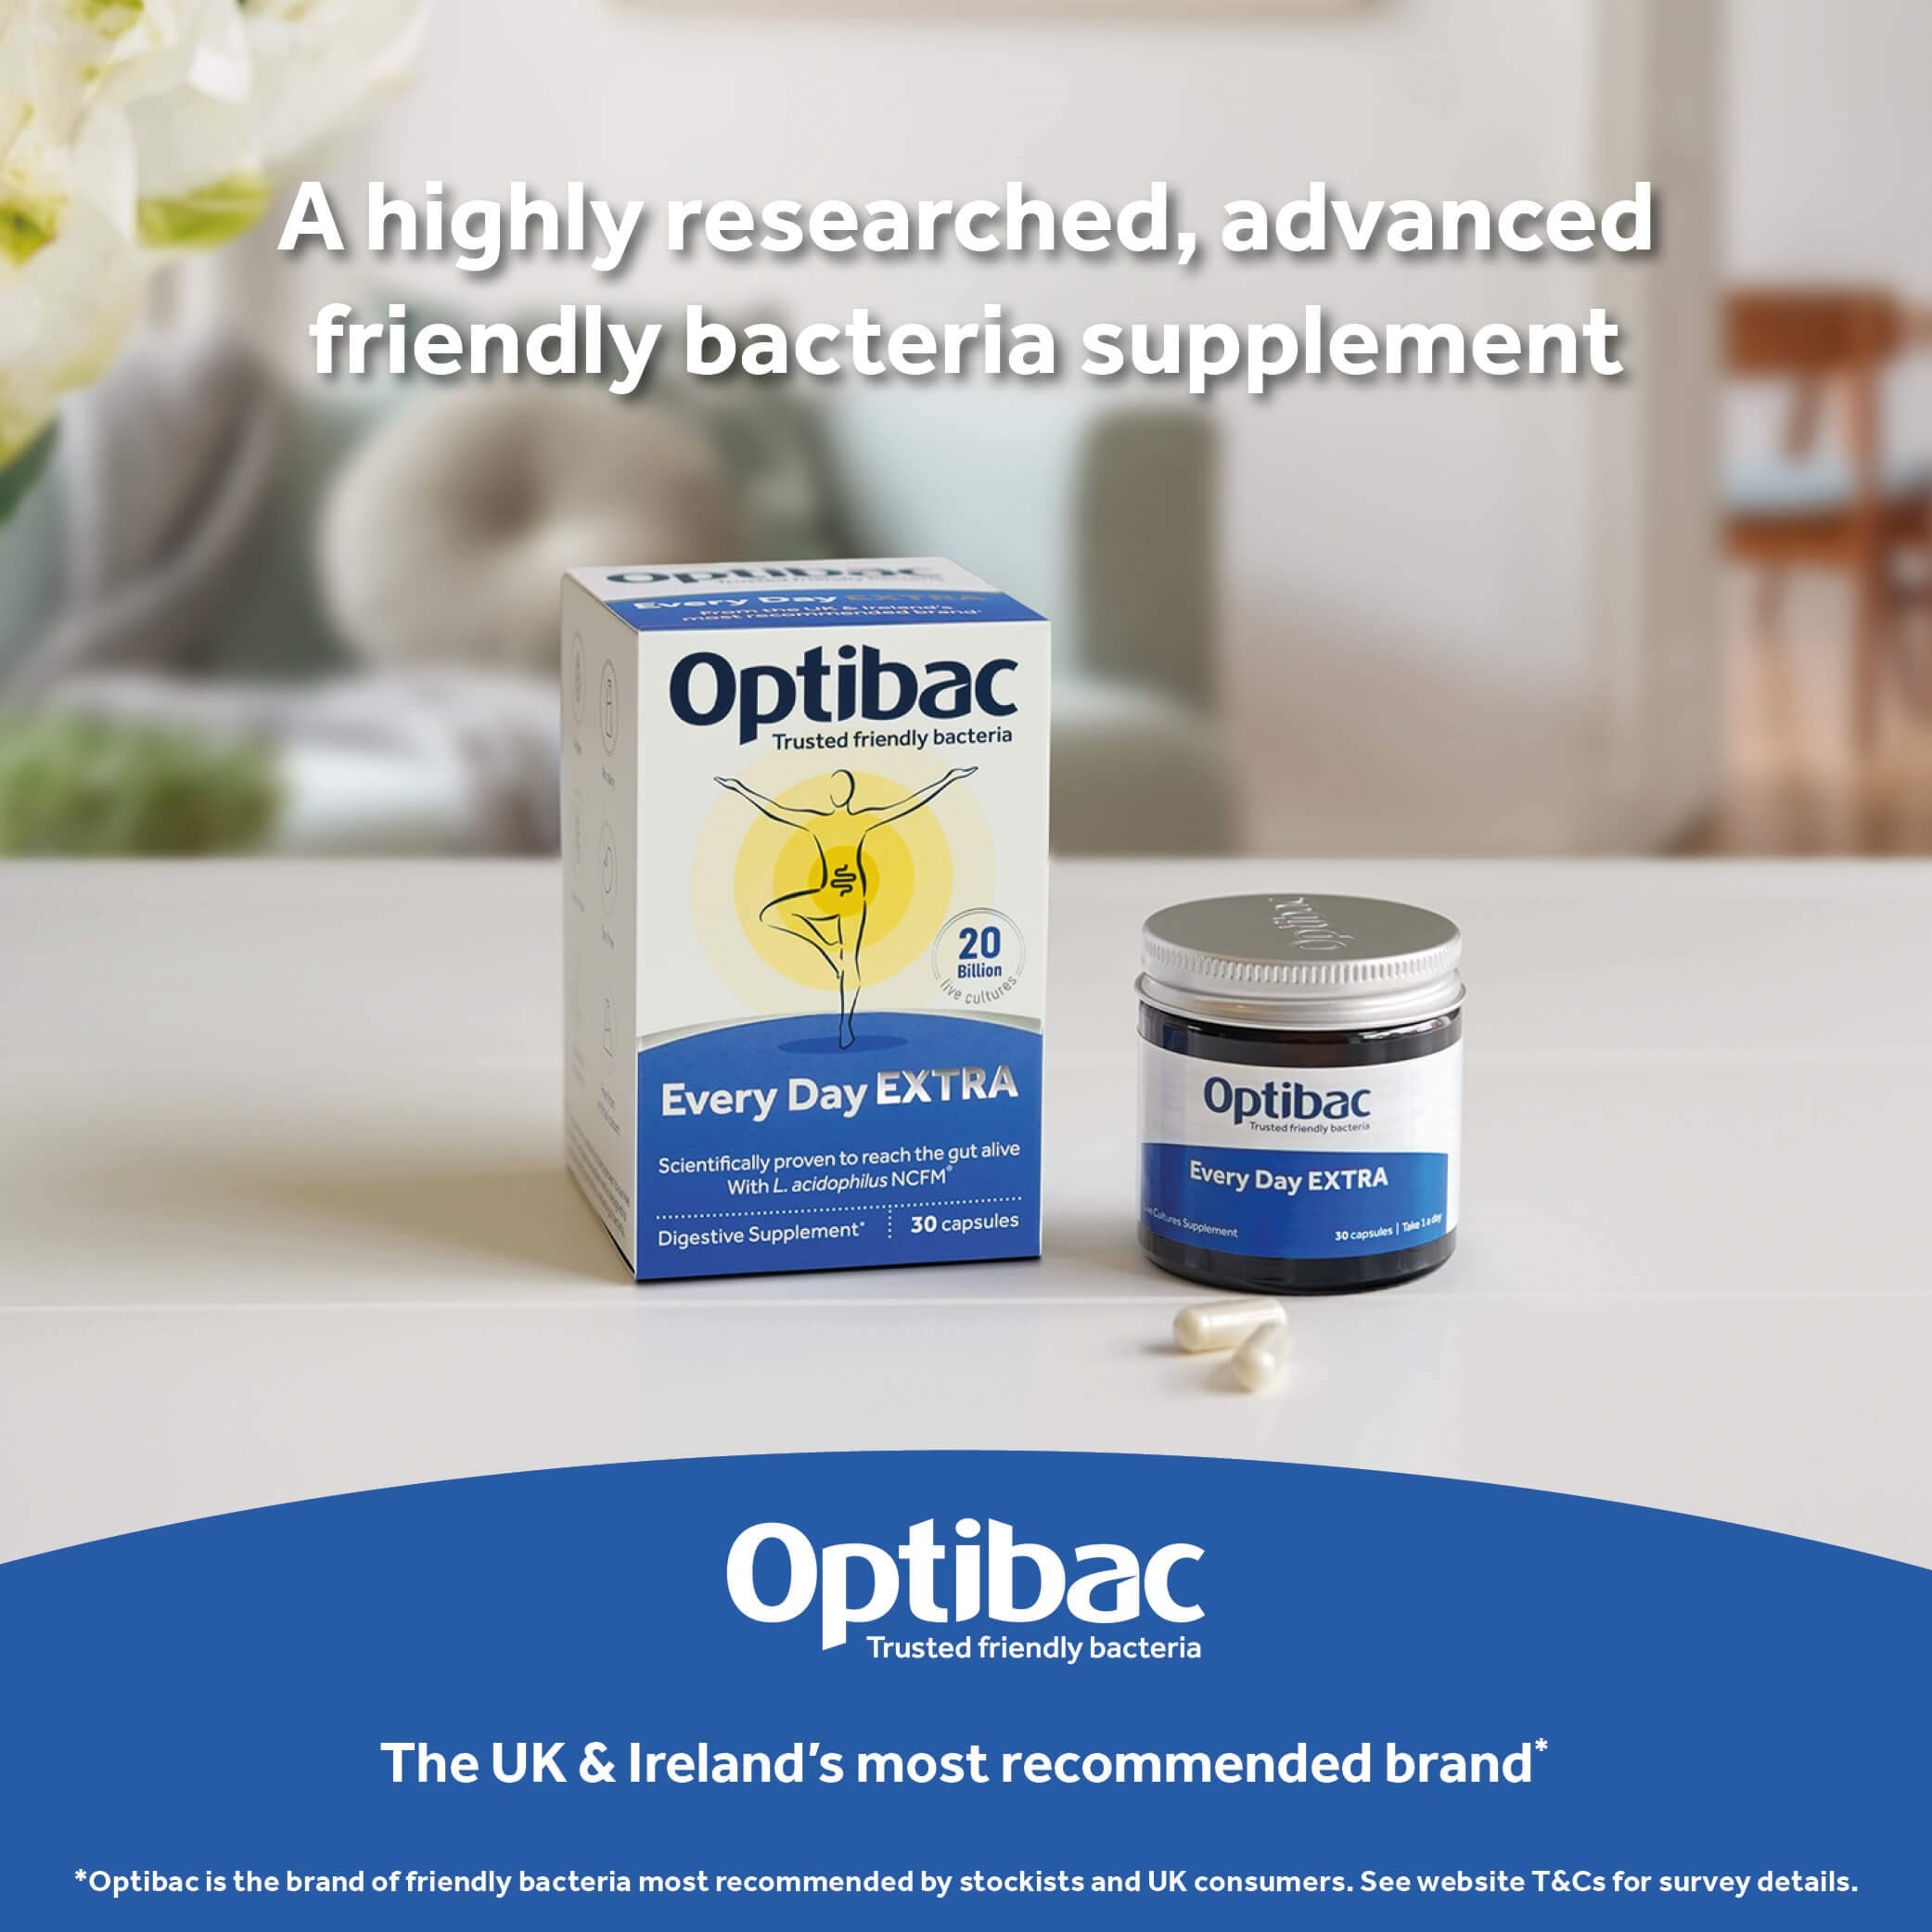 Optibac Probiotics Every Day EXTRA - highly researched